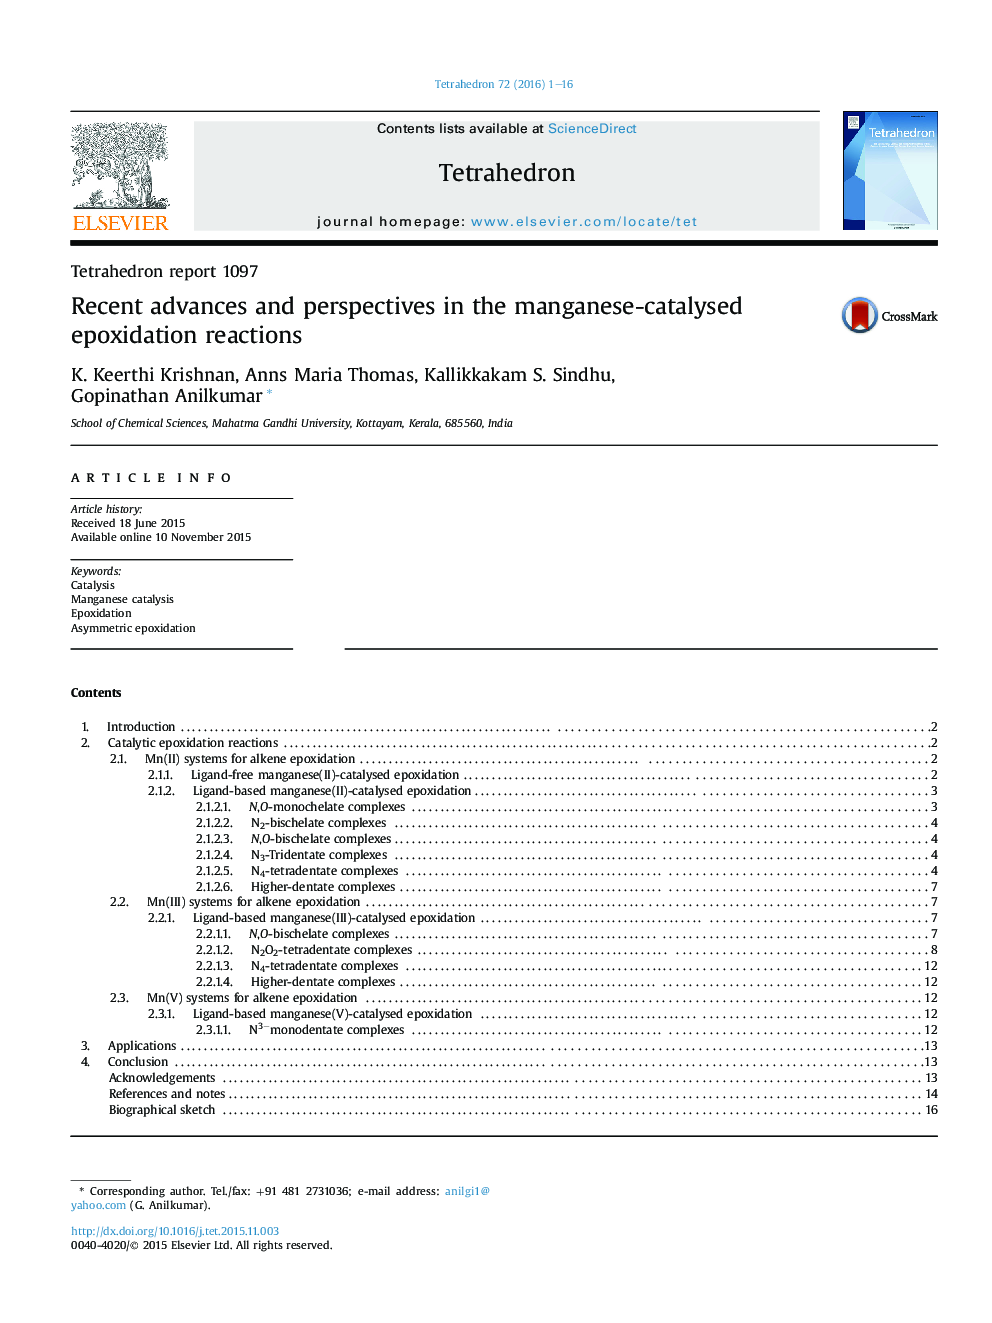 Tetrahedron report 1097Recent advances and perspectives in the manganese-catalysed epoxidation reactions